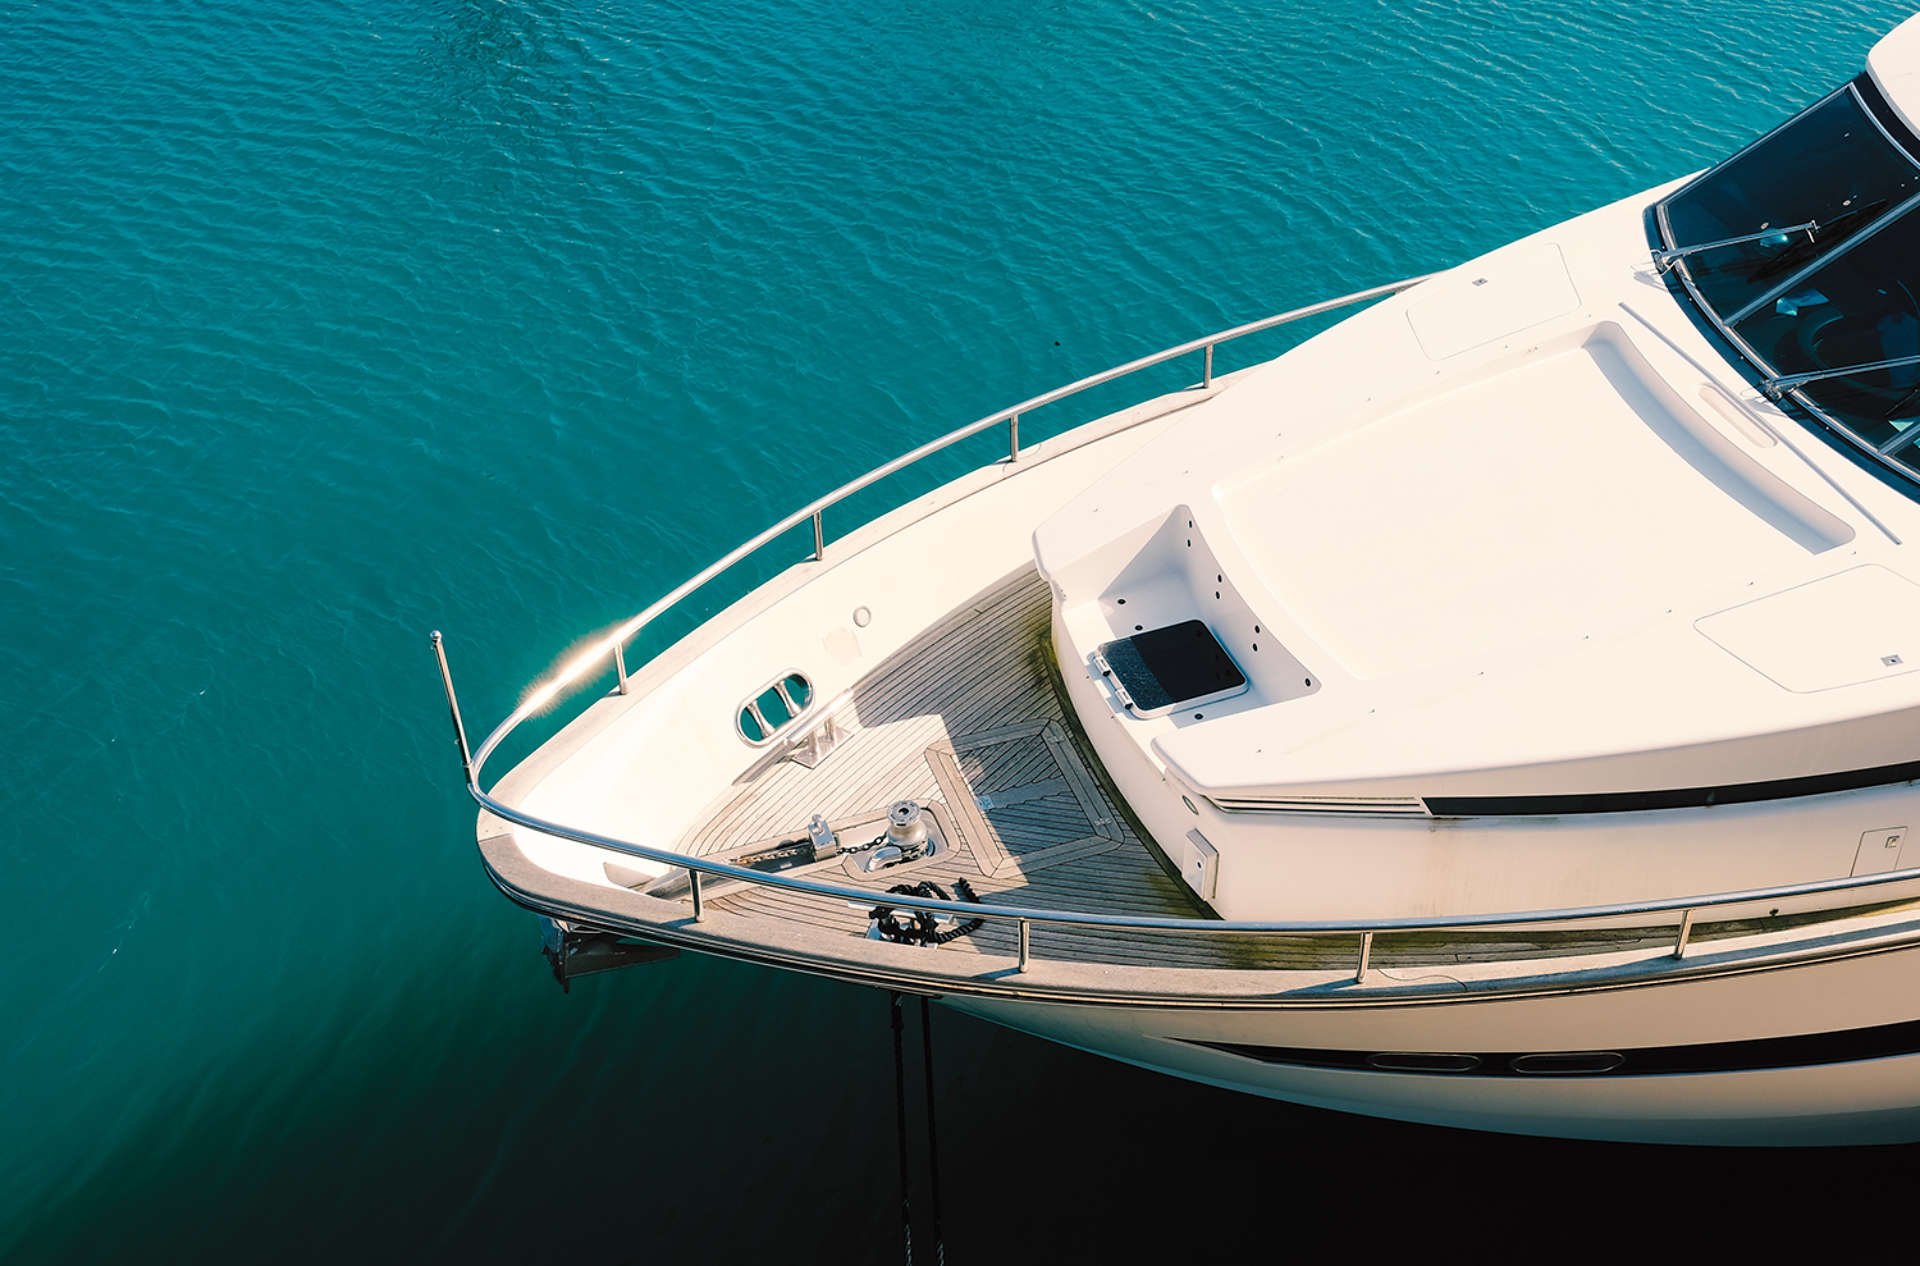 Documentation needed for boat ownership in Australia